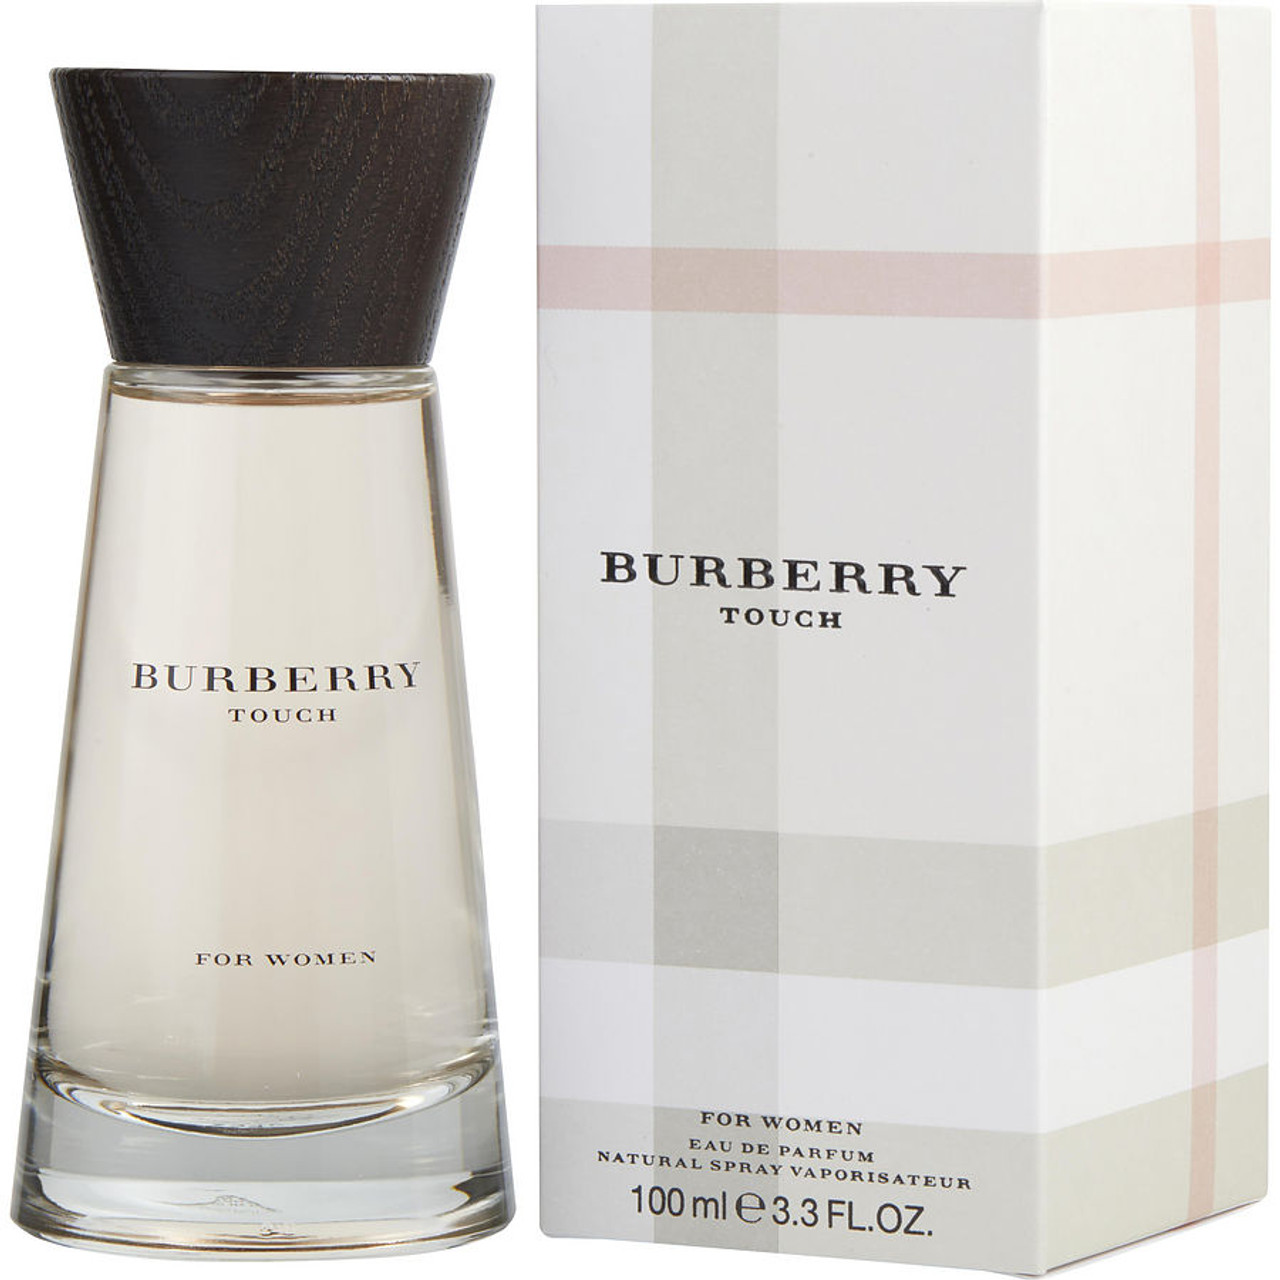 burberry touch 1.7 oz